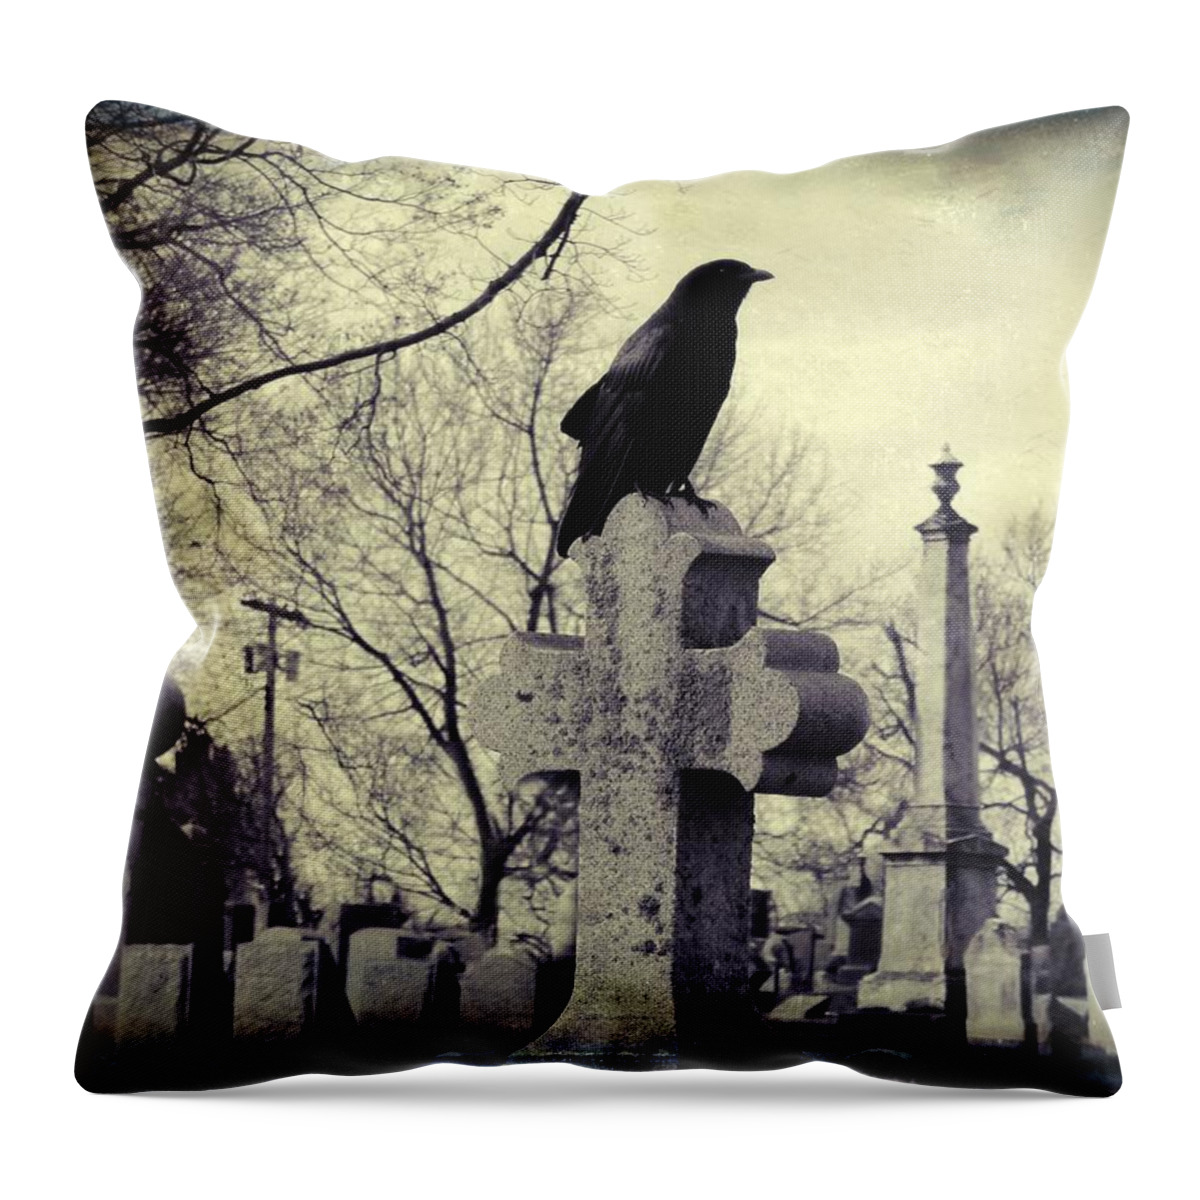 Crow In Graveyard Throw Pillow featuring the photograph Crow Is A Common Cemetery Staple by Gothicrow Images